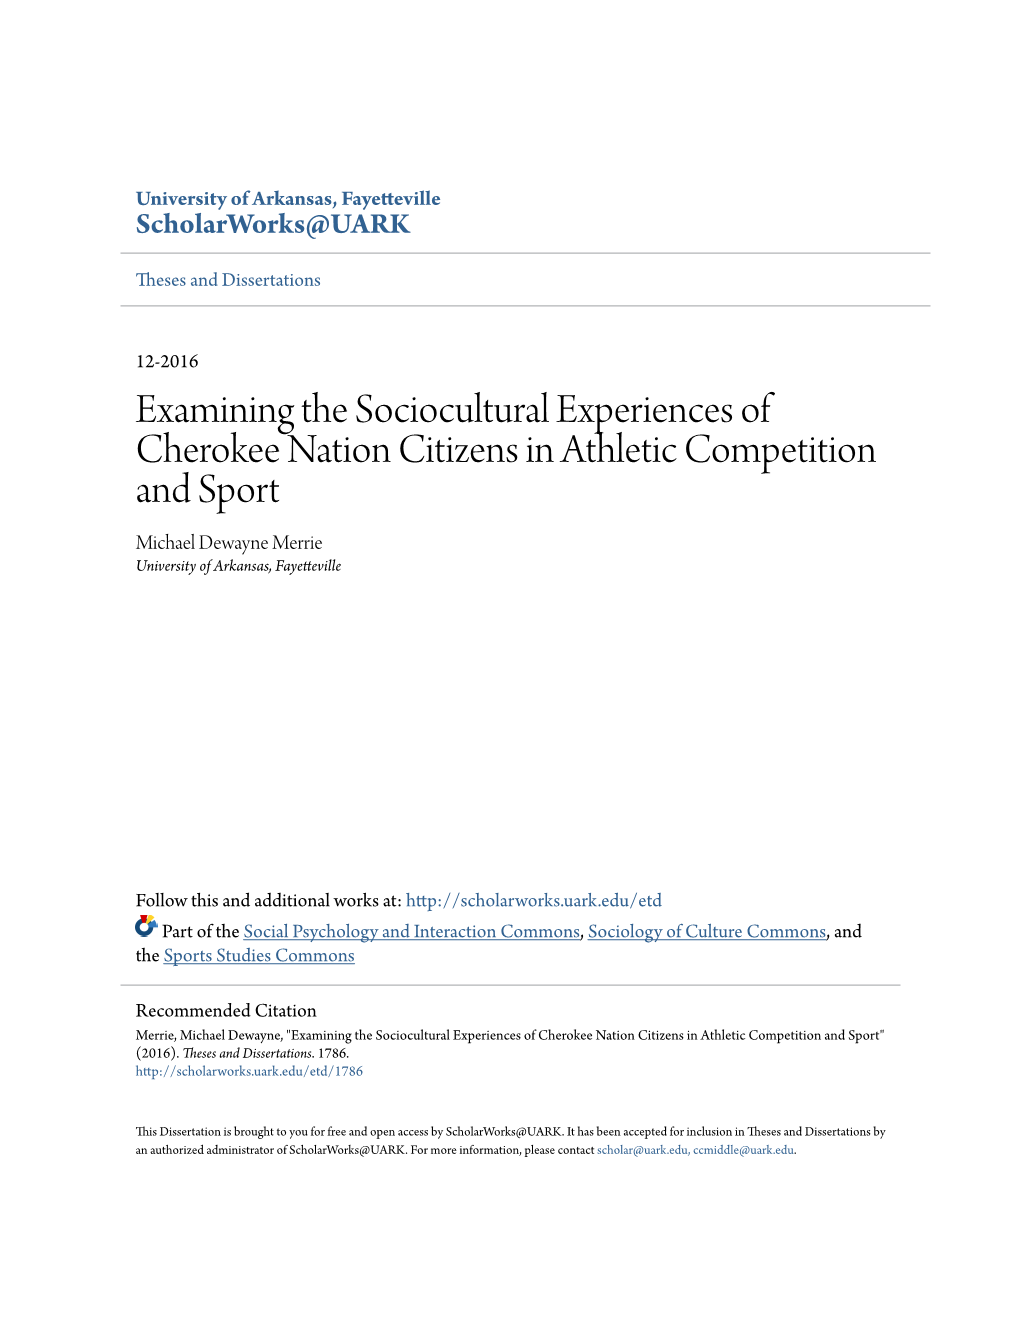 Examining the Sociocultural Experiences of Cherokee Nation Citizens in Athletic Competition and Sport Michael Dewayne Merrie University of Arkansas, Fayetteville